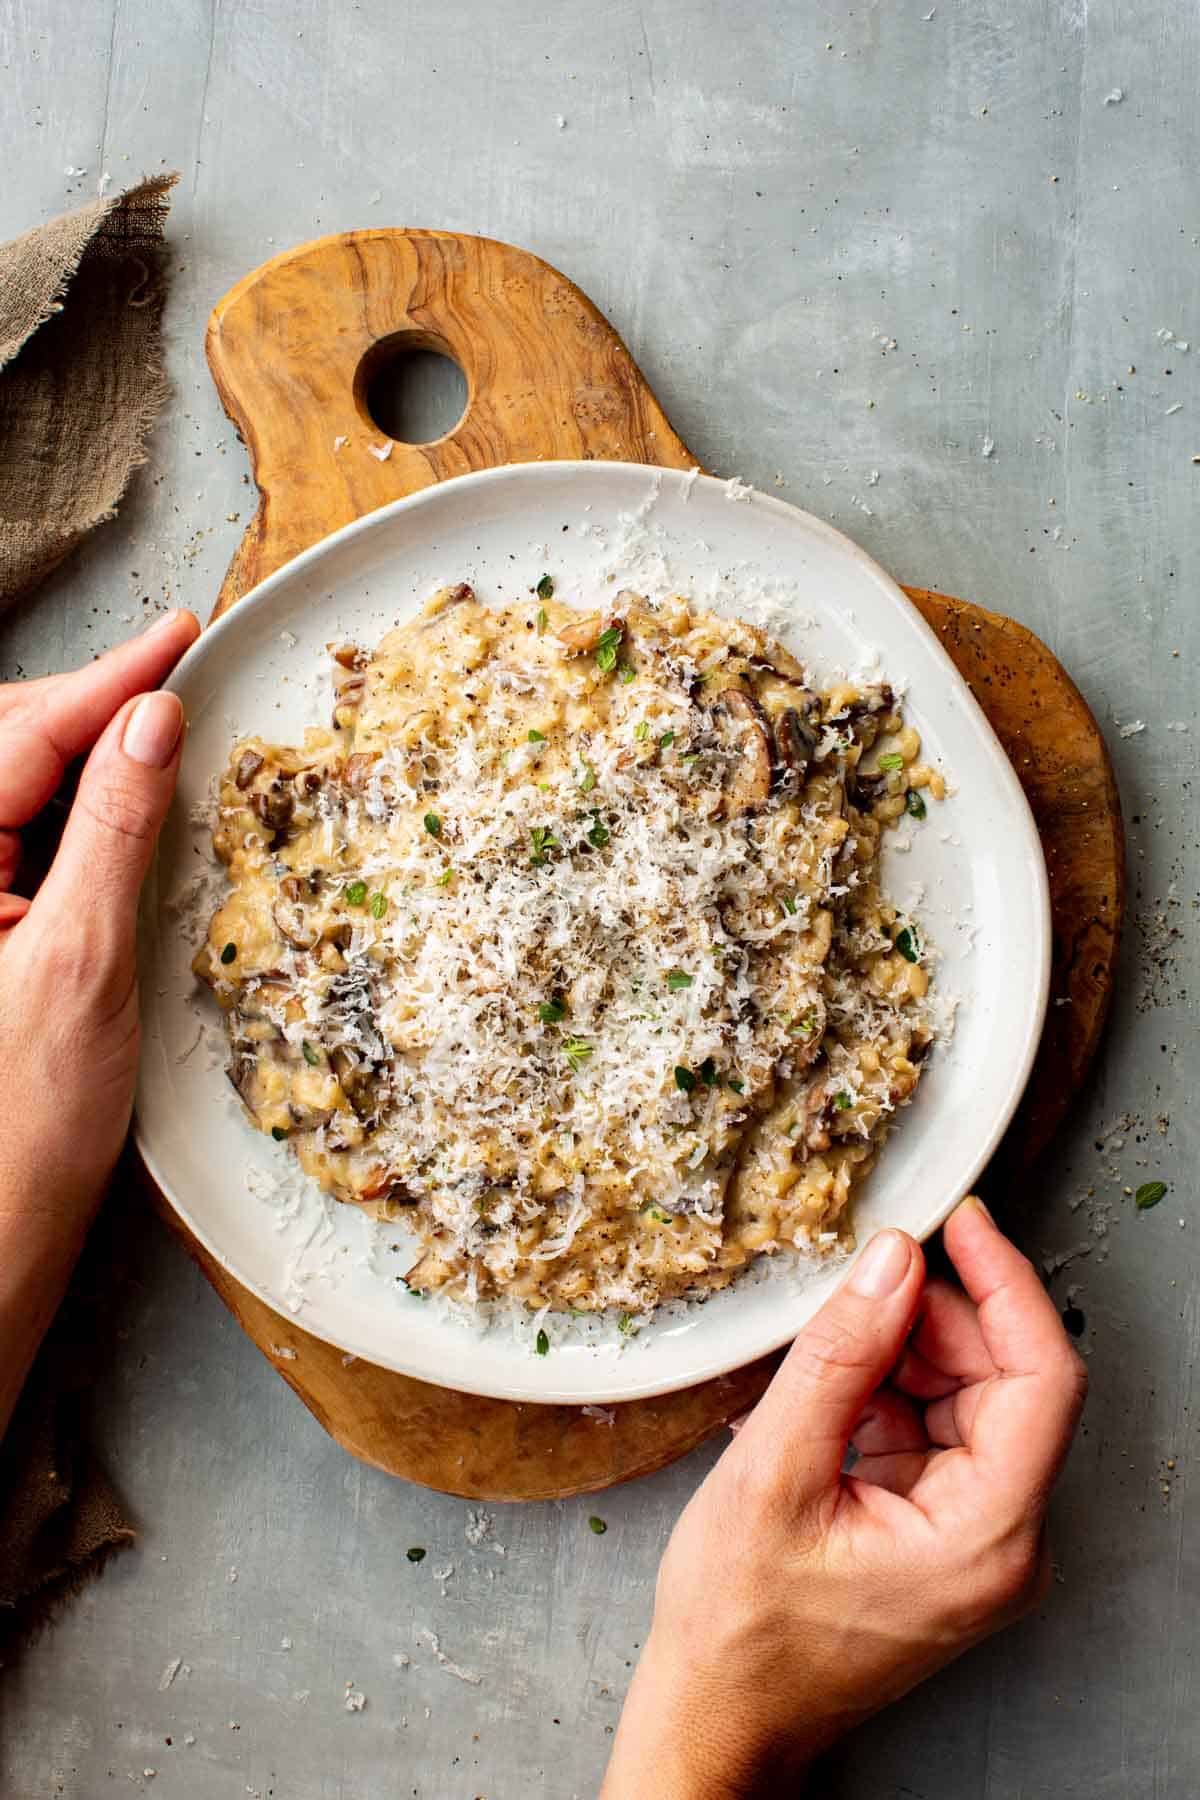 Hands holding a white plate filled with creamy wild mushroom risotto.